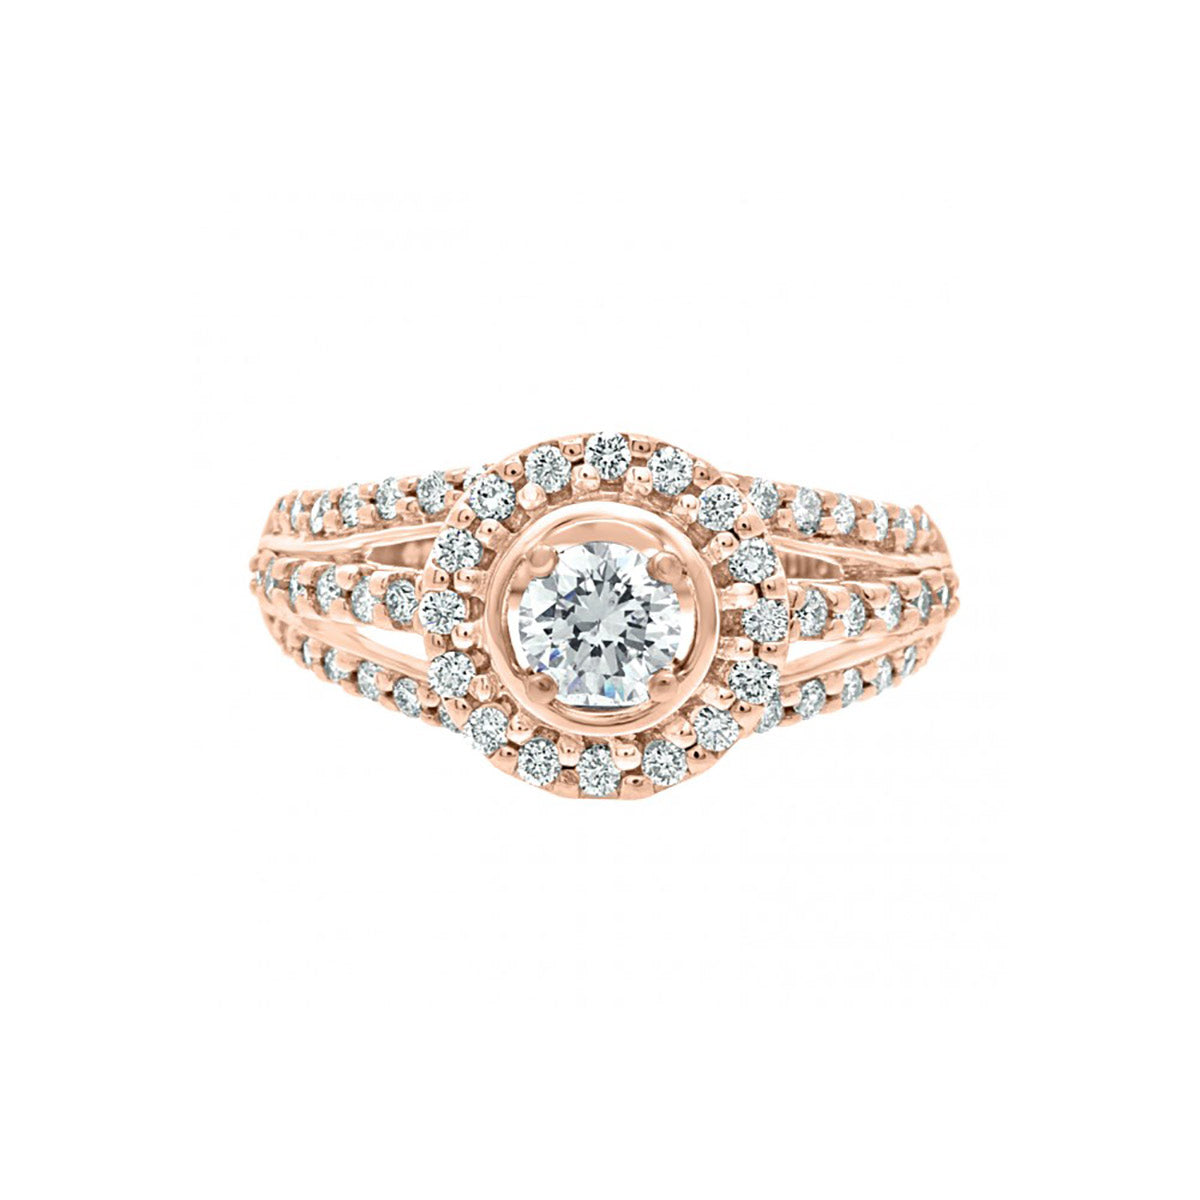 Three Band Engagement Ring in rose gold